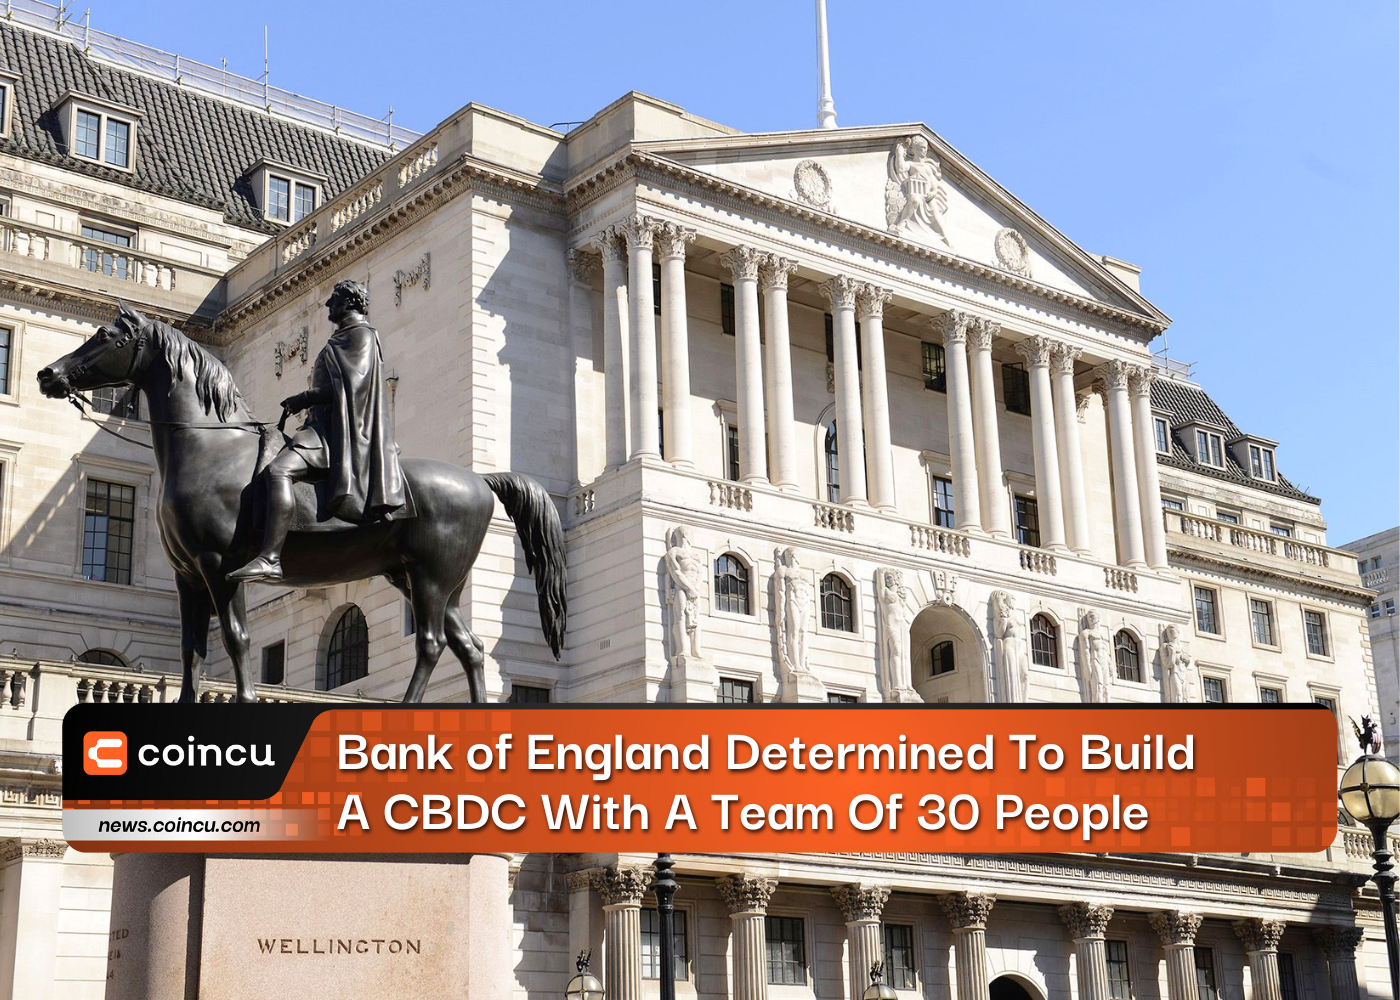 Bank of England Determined To Build A CBDC With A Team Of 30 People